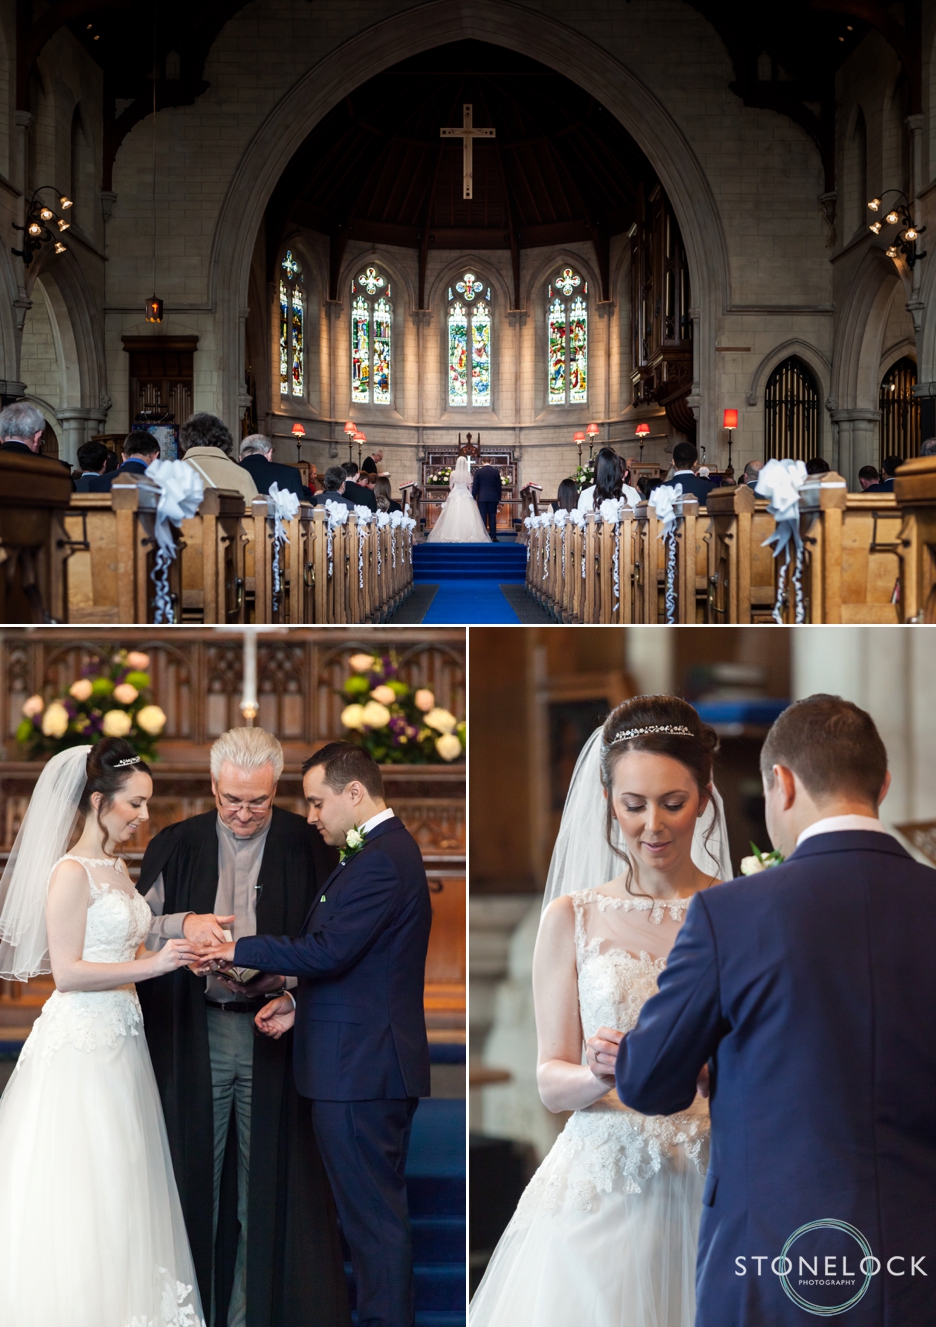 The wedding ceremony at Trinity Church in Sutton